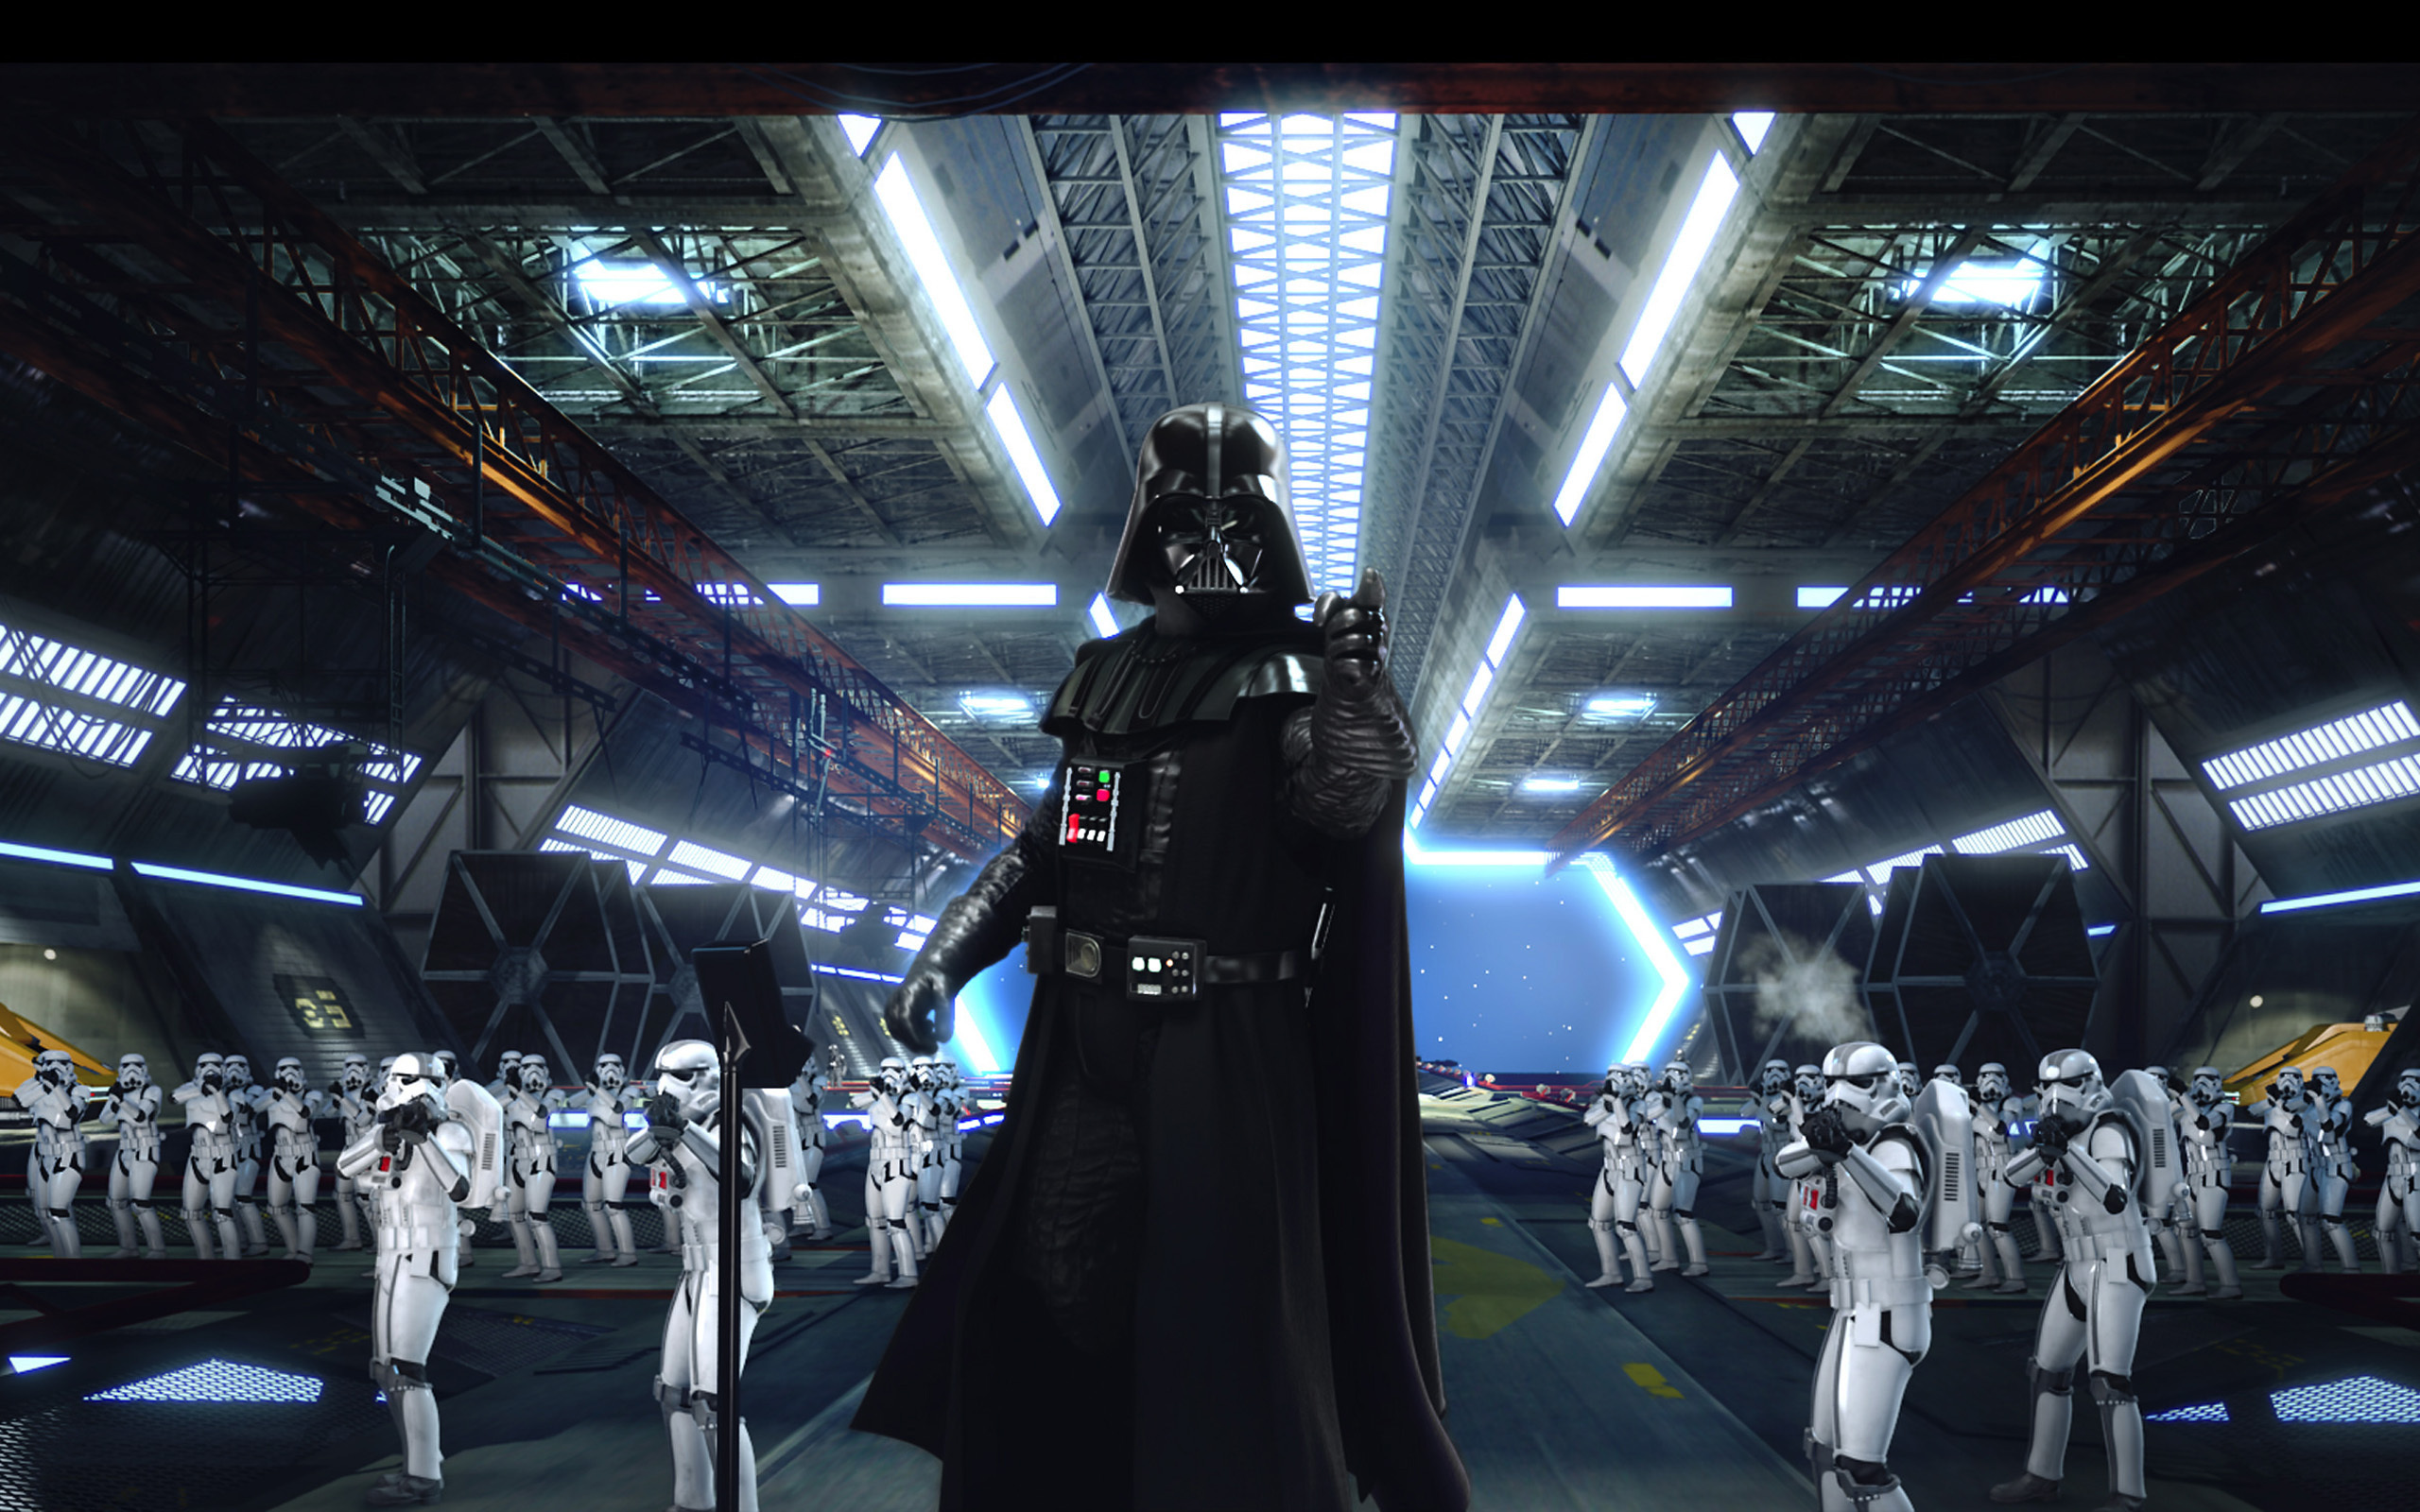  darth vader wallpapers download backgrounds computer hd wallpapers hd 2560x1600